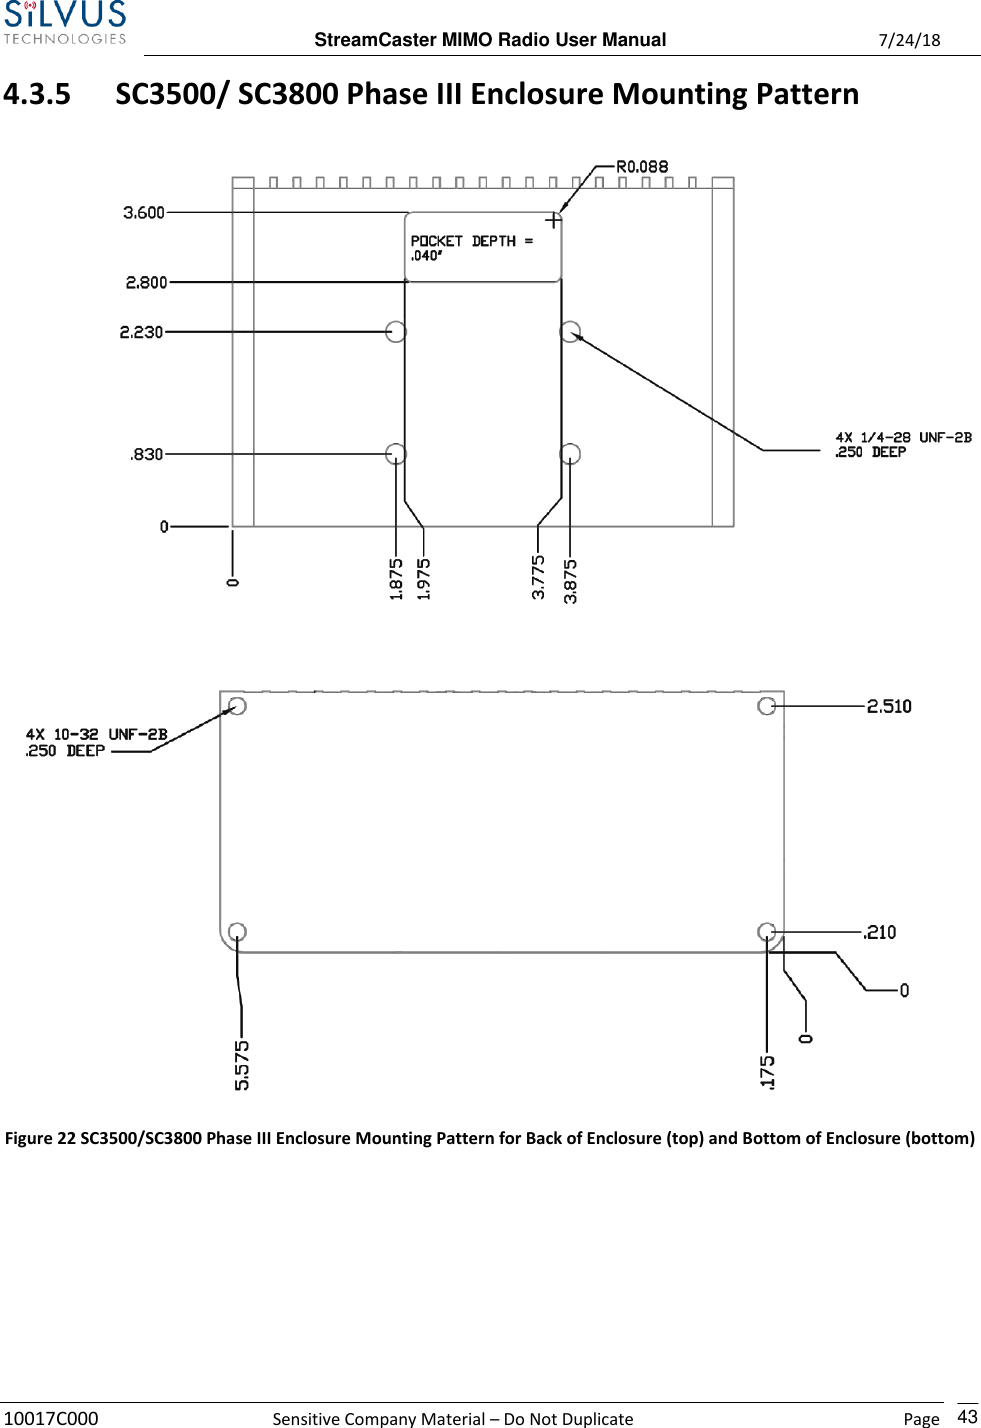  StreamCaster MIMO Radio User Manual  7/24/18 10017C000  Sensitive Company Material – Do Not Duplicate    Page    43 4.3.5 SC3500/ SC3800 Phase III Enclosure Mounting Pattern   Figure 22 SC3500/SC3800 Phase III Enclosure Mounting Pattern for Back of Enclosure (top) and Bottom of Enclosure (bottom)   